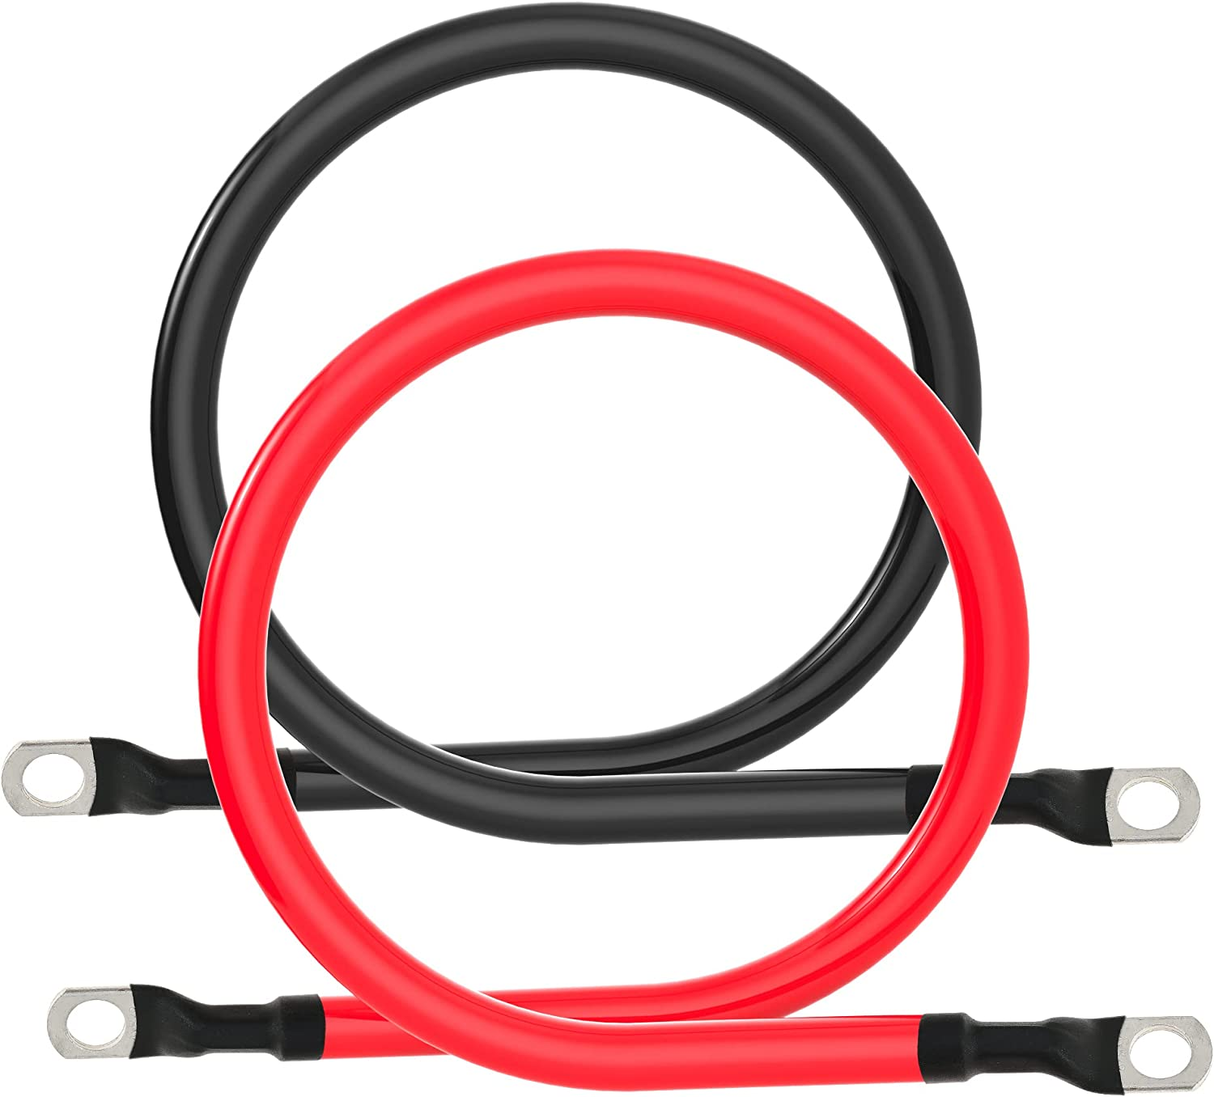 Rocksolar 8-inch 6AWG Battery Interconnect Cable Set